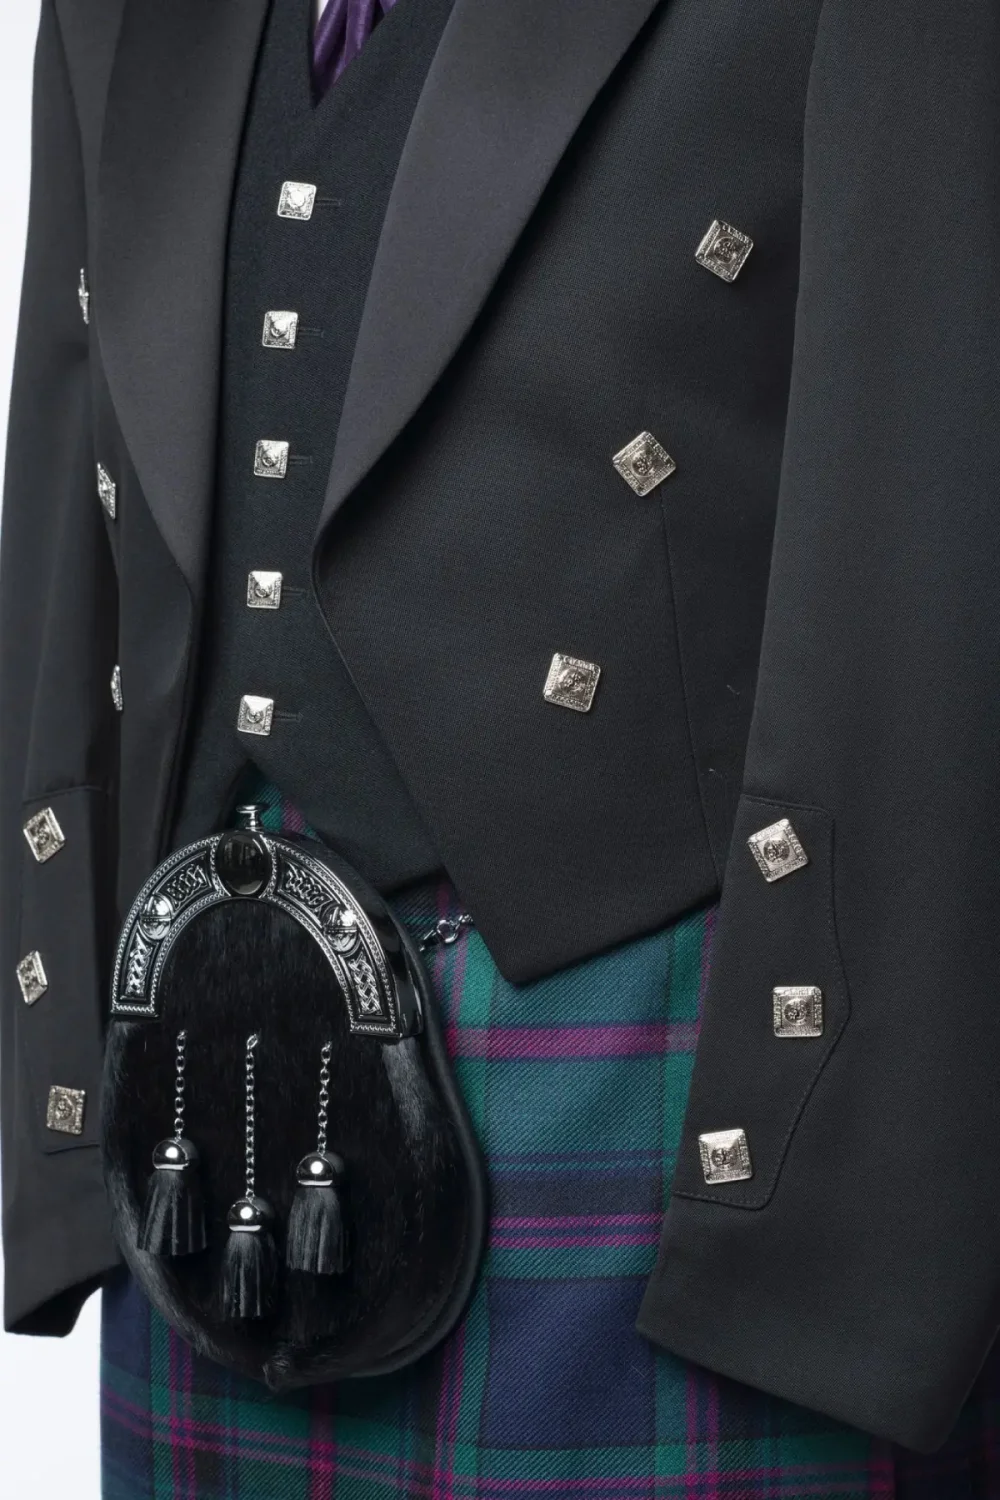 A closeup photo of Prince Charlie Kilt Outfit with 5 button Vest.